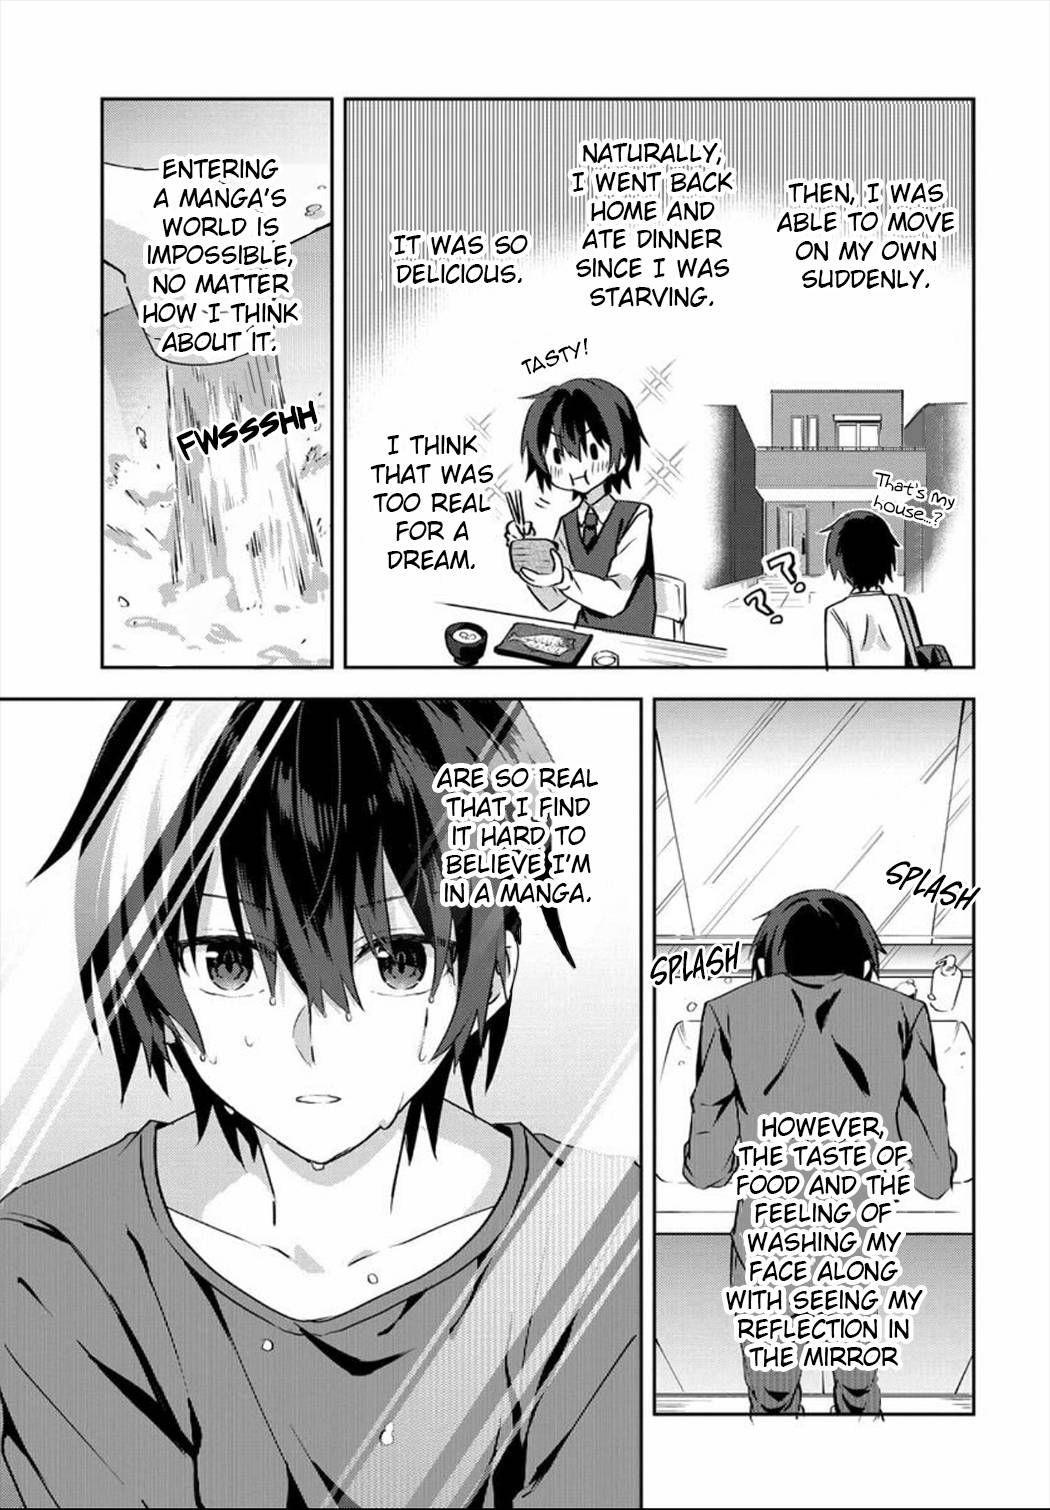 Since I’Ve Entered The World Of Romantic Comedy Manga, I’Ll Do My Best To Make The Losing Heroine Happy - chapter 2.2 - #2